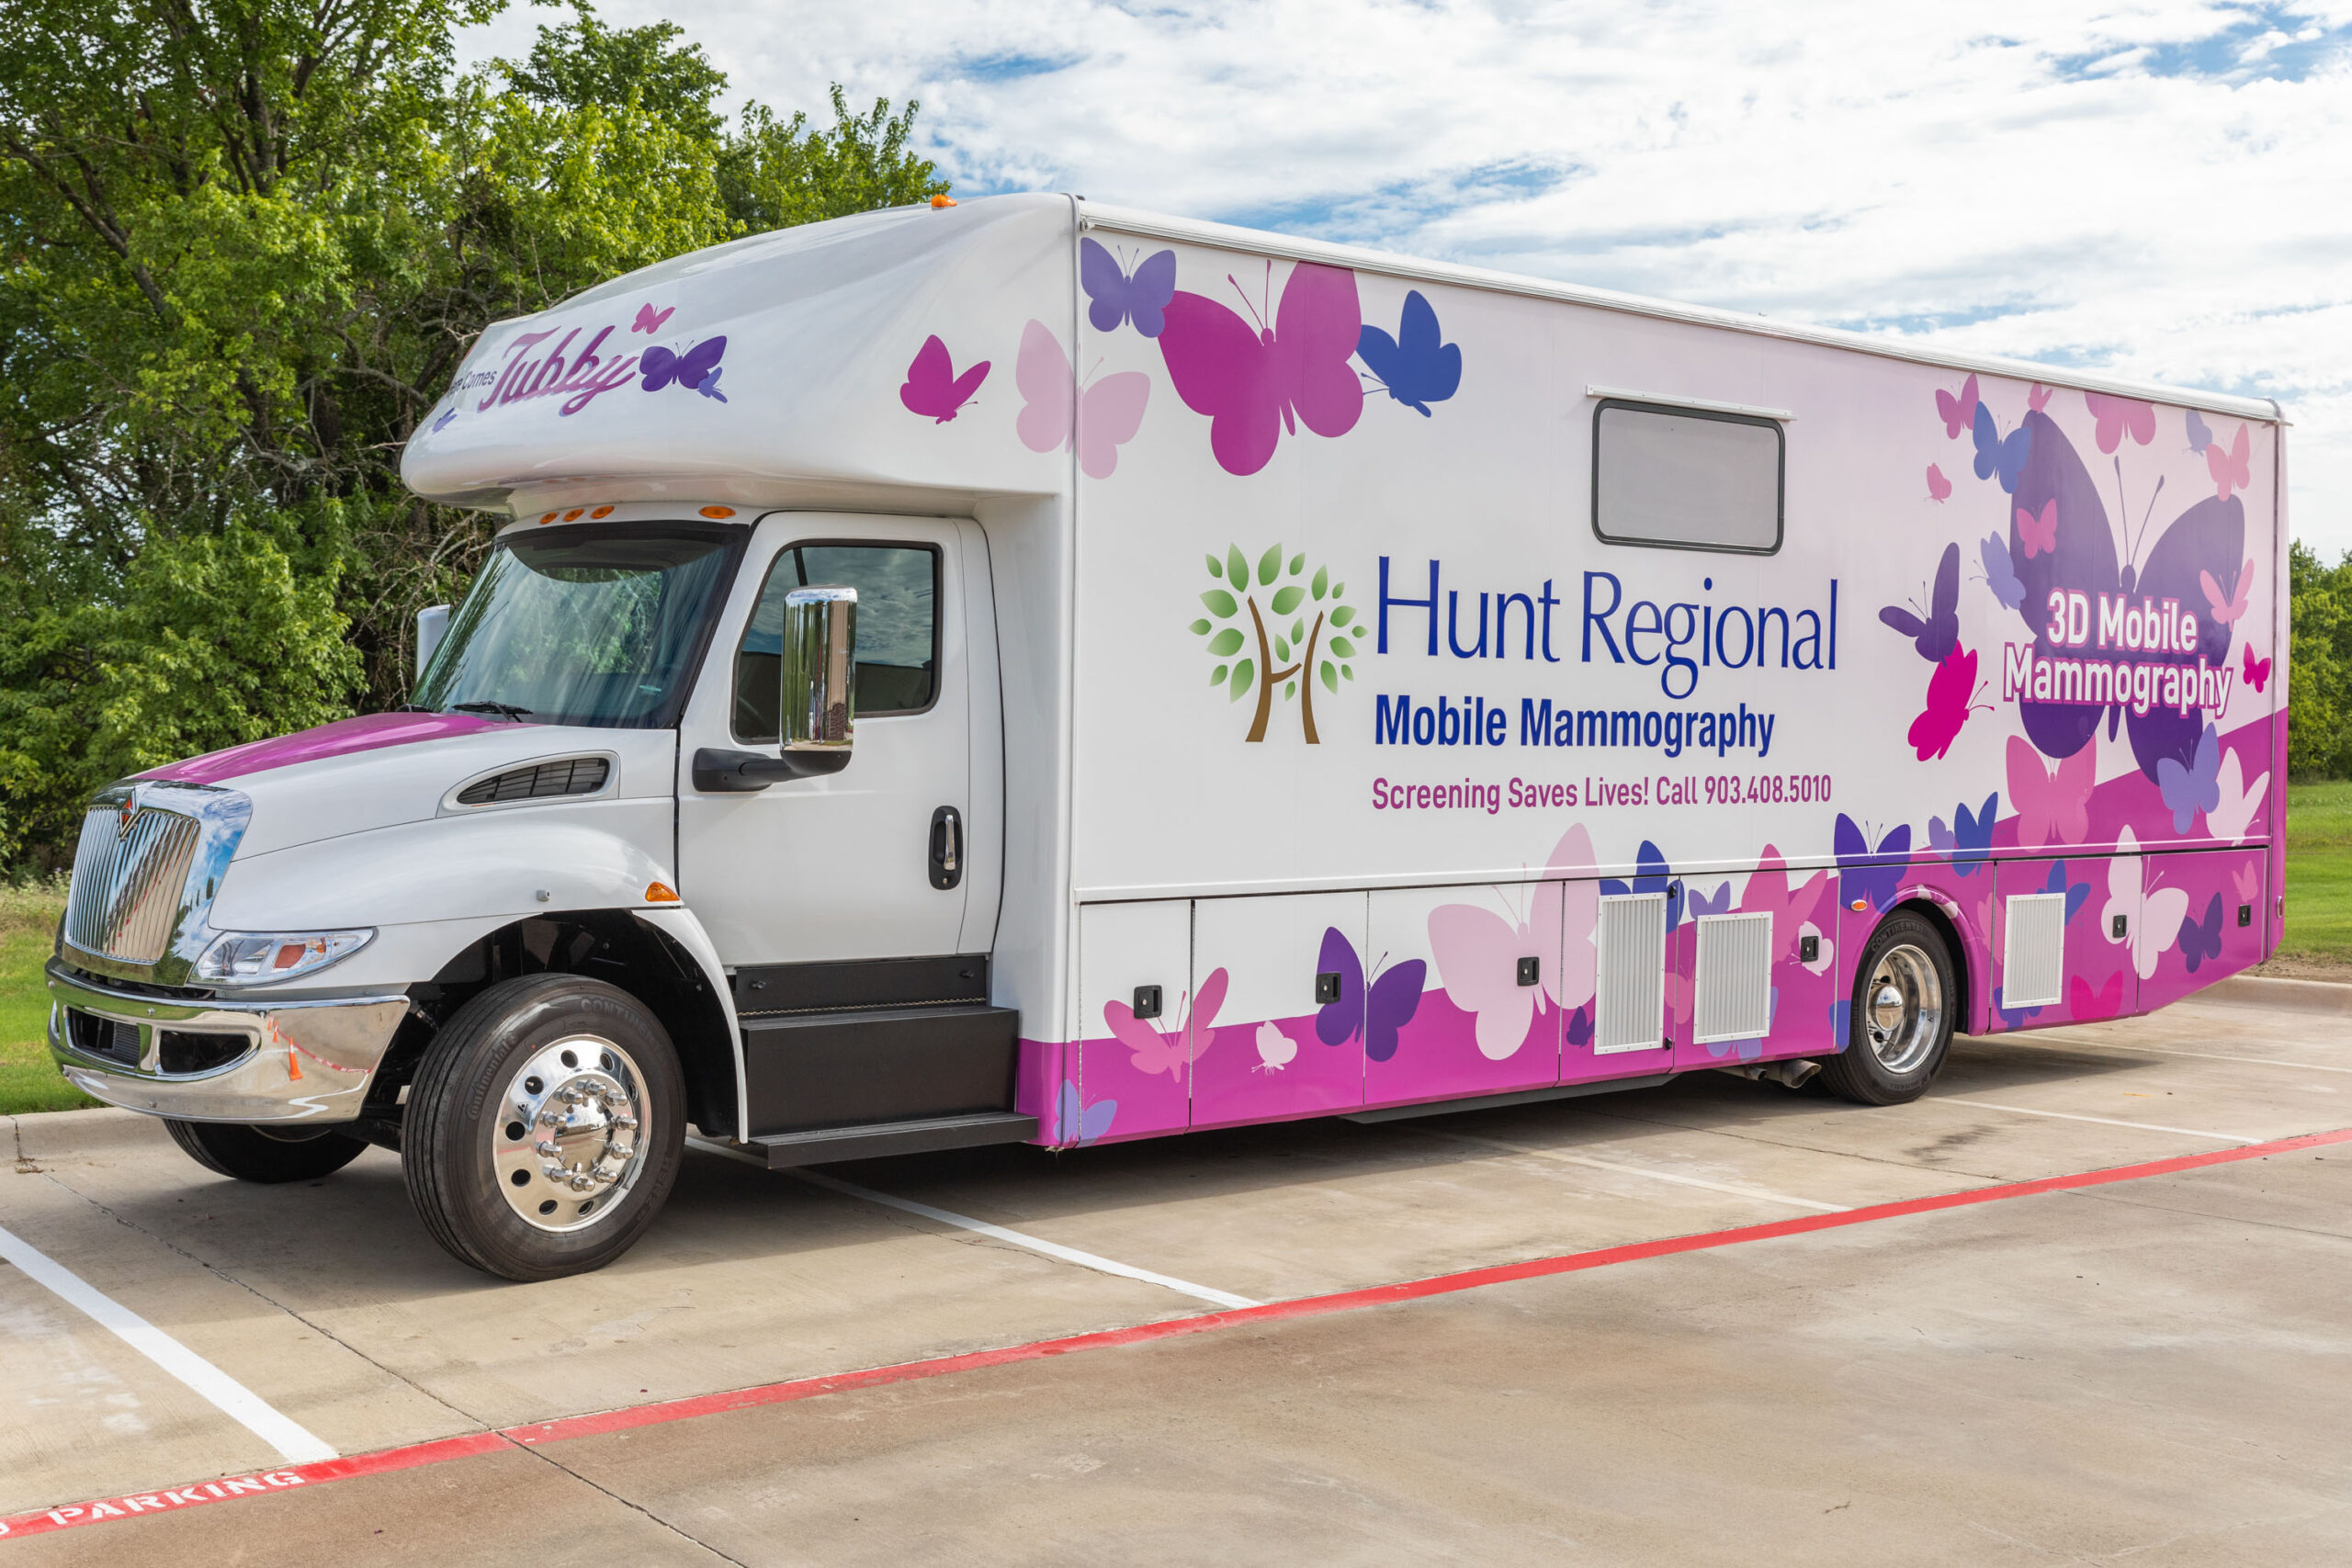 3D Mobile Mammography